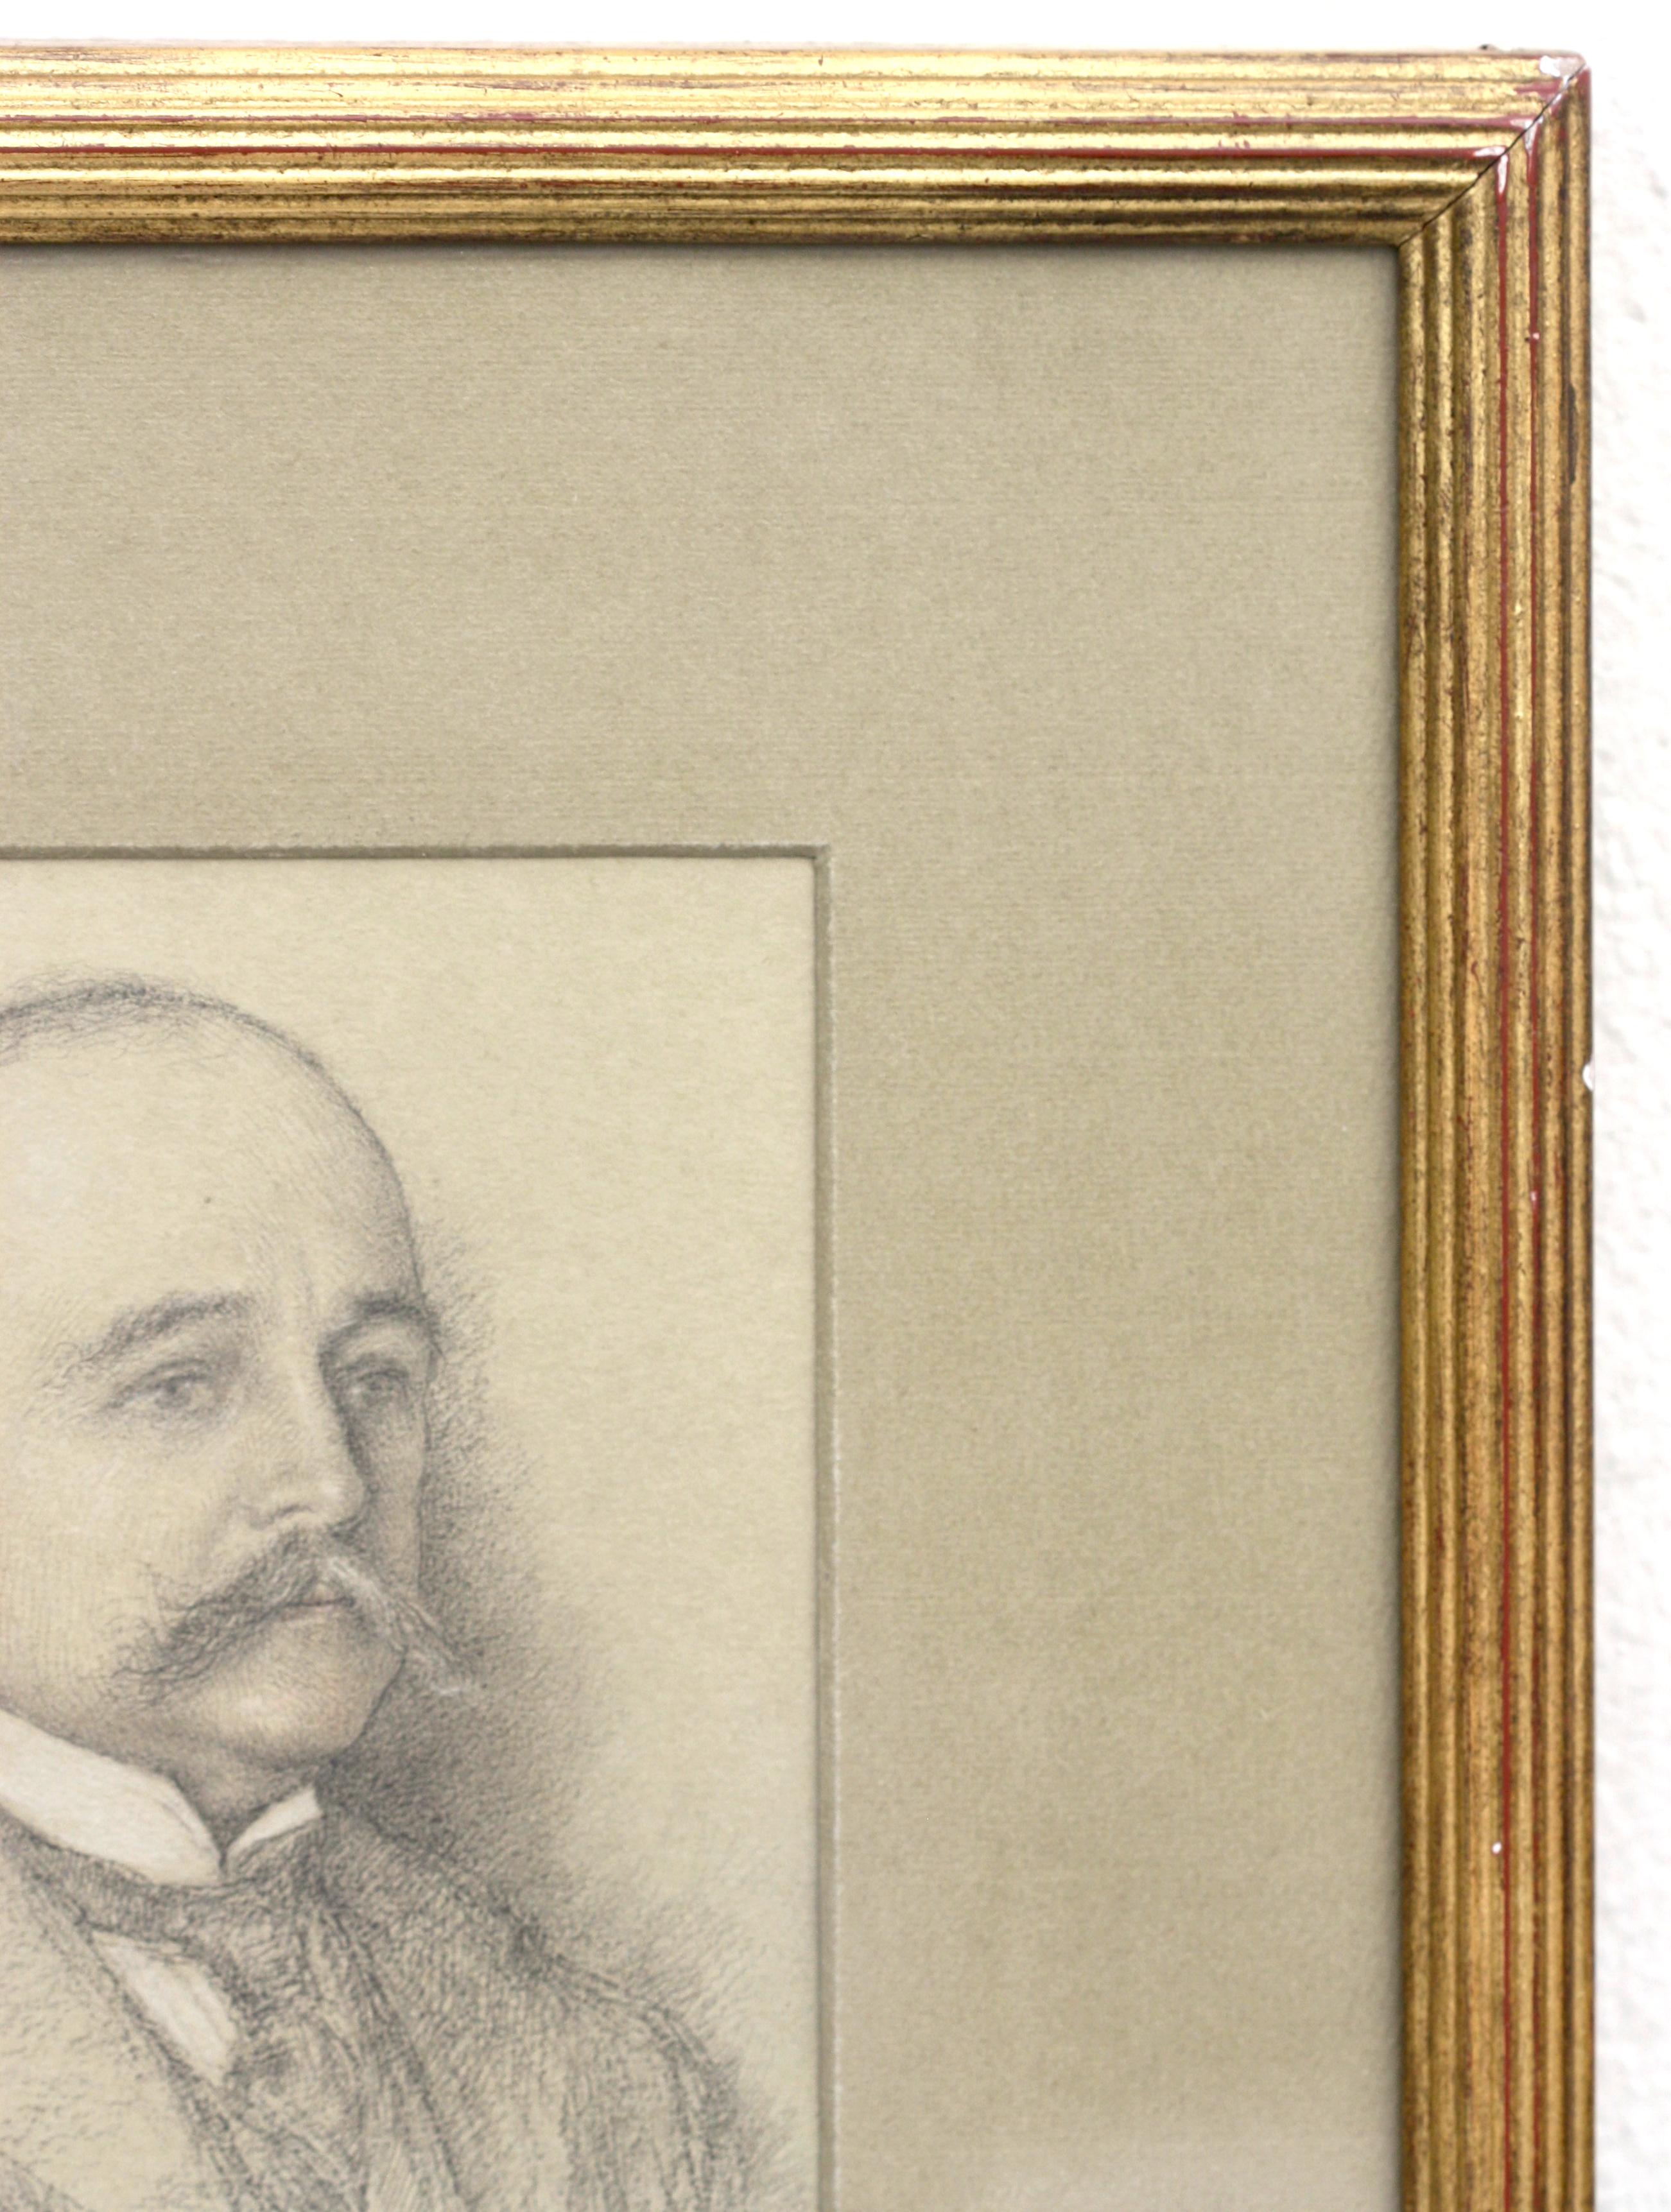 Ernest Haskell (1876-1925)
Gentleman with A Moustache.
Pencil on paper
Measures: 7 x 4 3/4 inches (sight size)
size with frame 
10 3/4 x 14 1/4 inches
Provenance:
Richard York Gallery, New York, NY
The estate of William M. Kingsland.
  